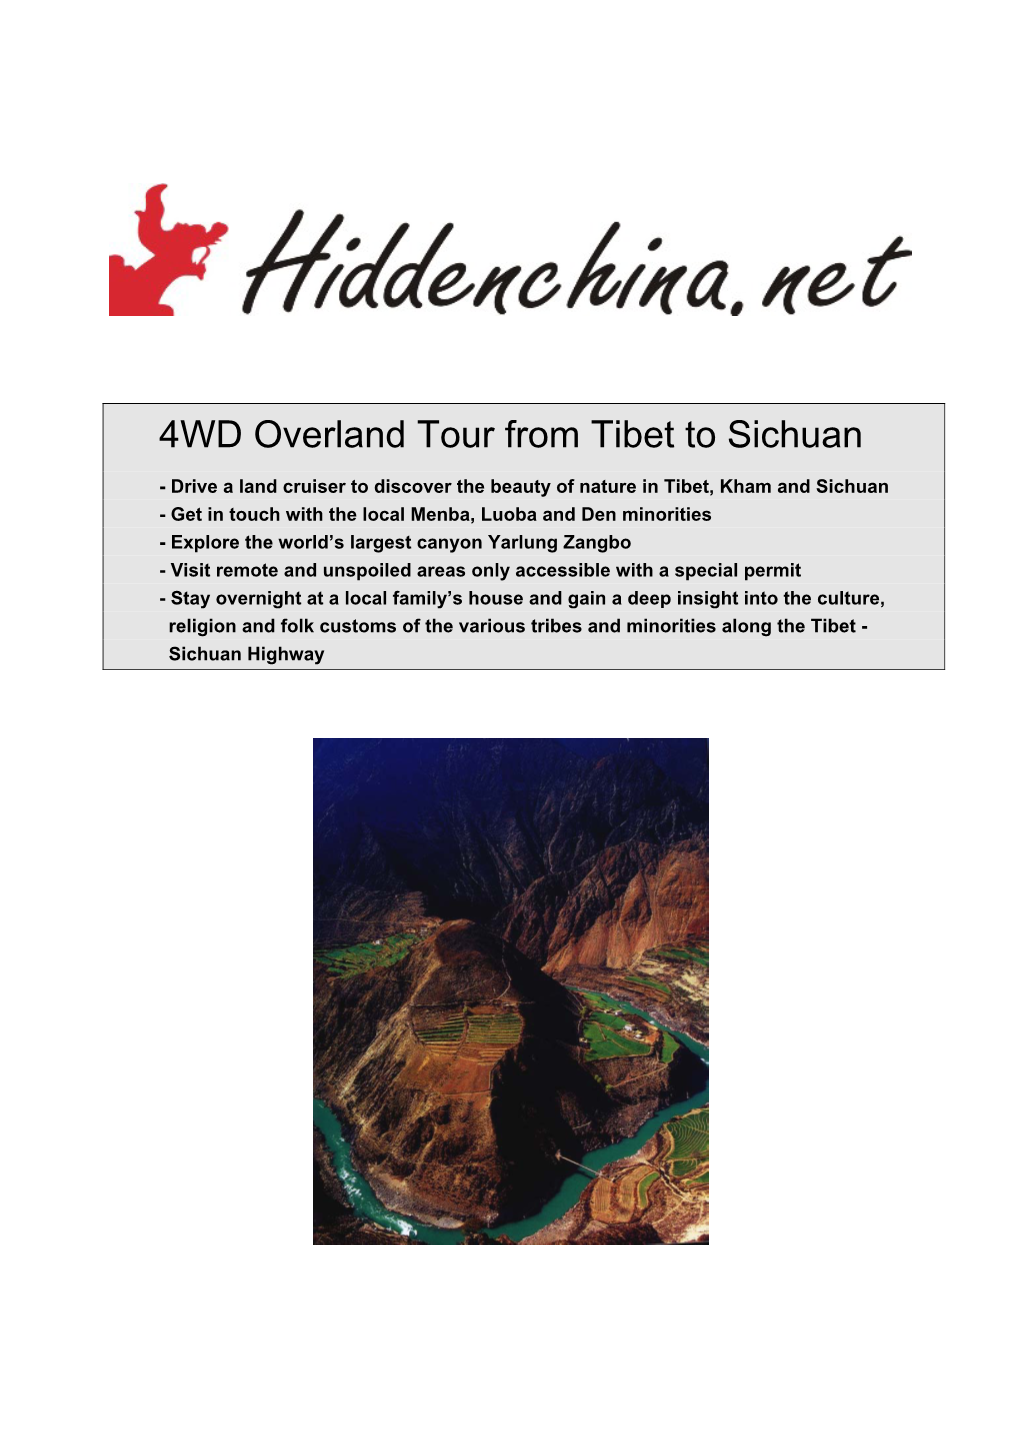 4WD Overland Tour from Tibet to Sichuan